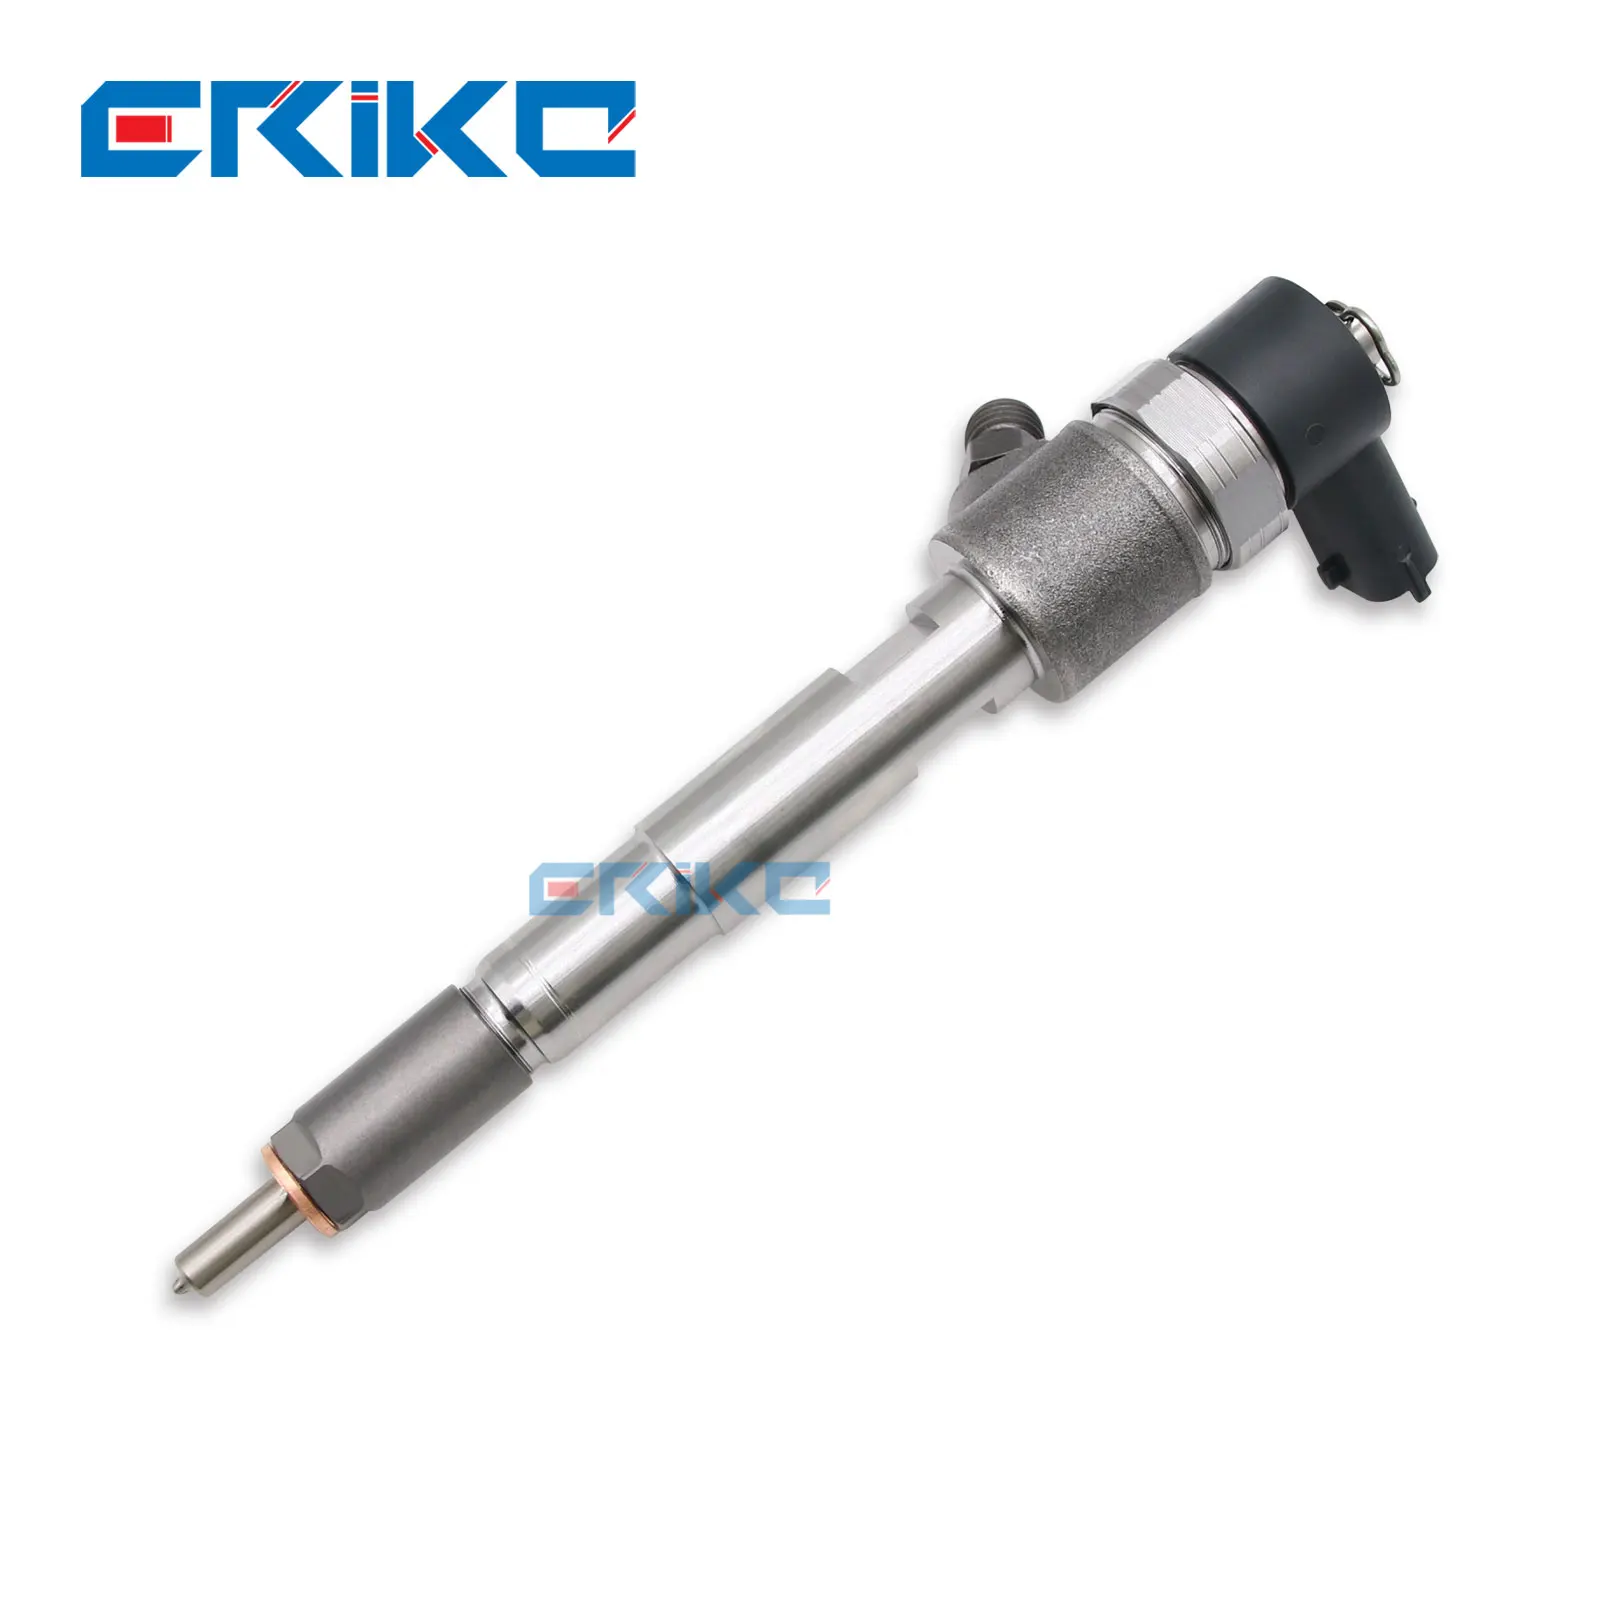 

0445110834 New Fuel CRDI Injector Assy OE 0445 110 834 Diesel Engine Parts Injection Nozzle 0 445 110 834